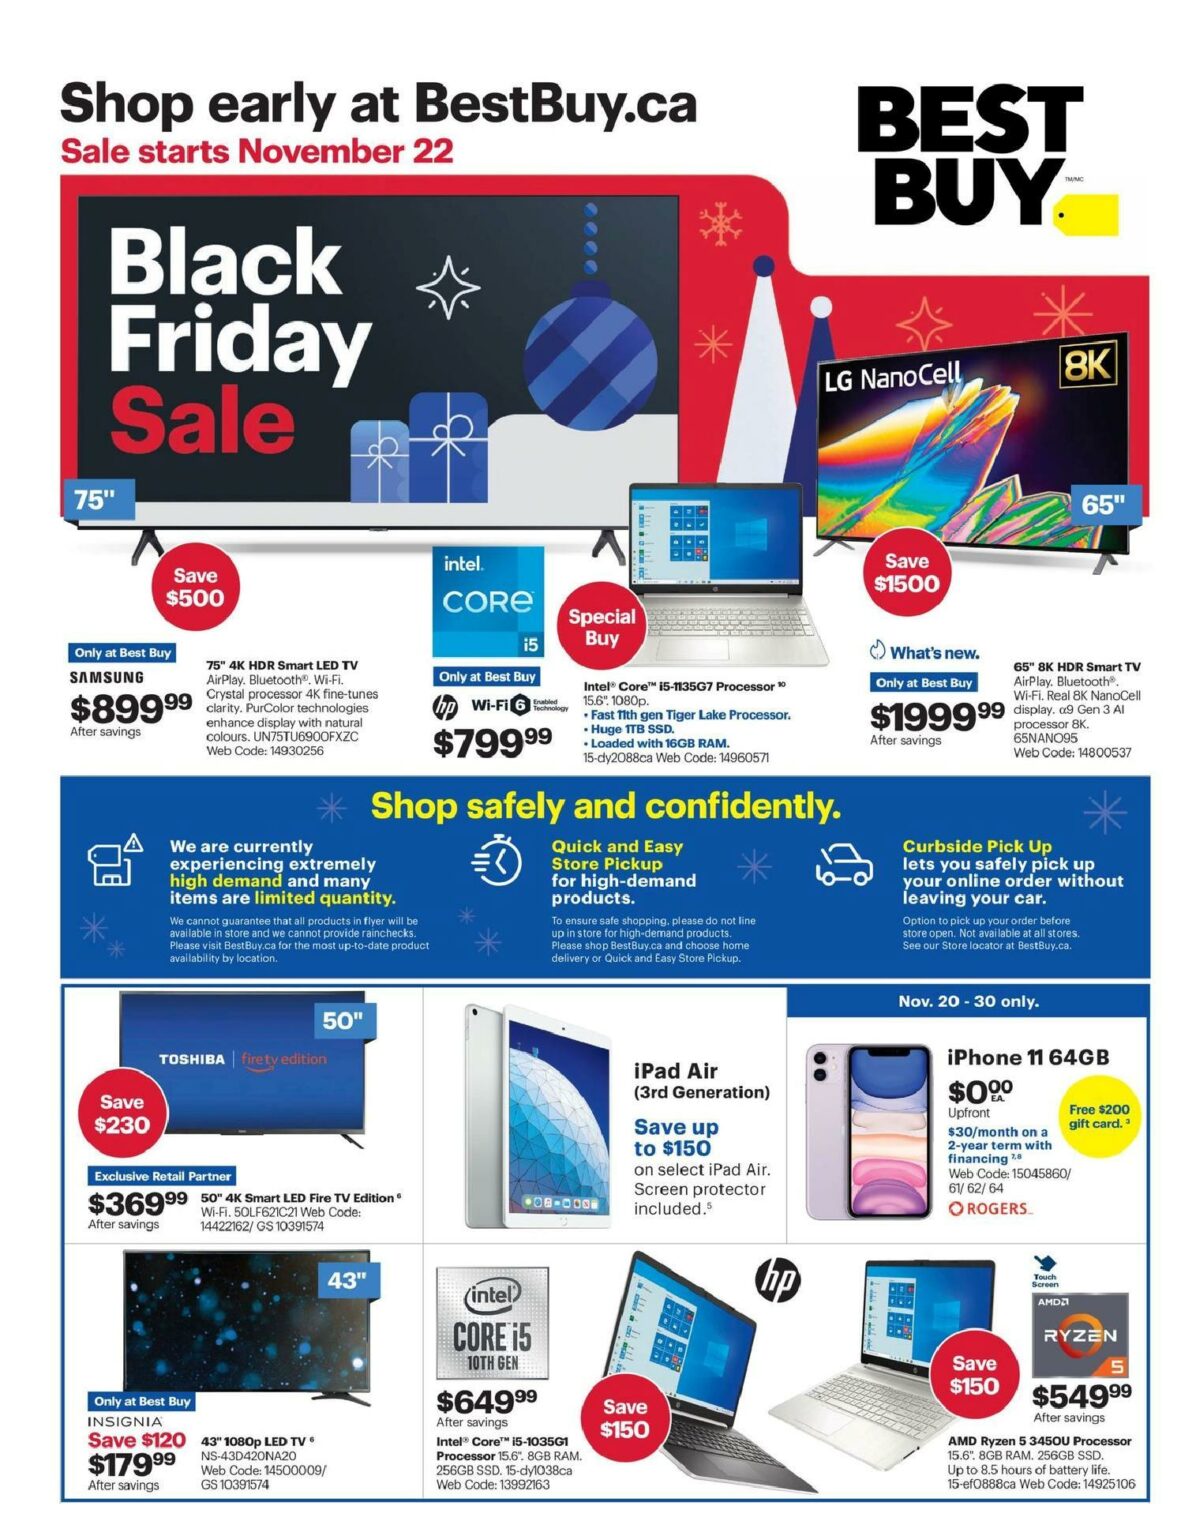 Best Buy Black Friday Flyer Deals 2020 Canada - How To Create Black Friday Deals